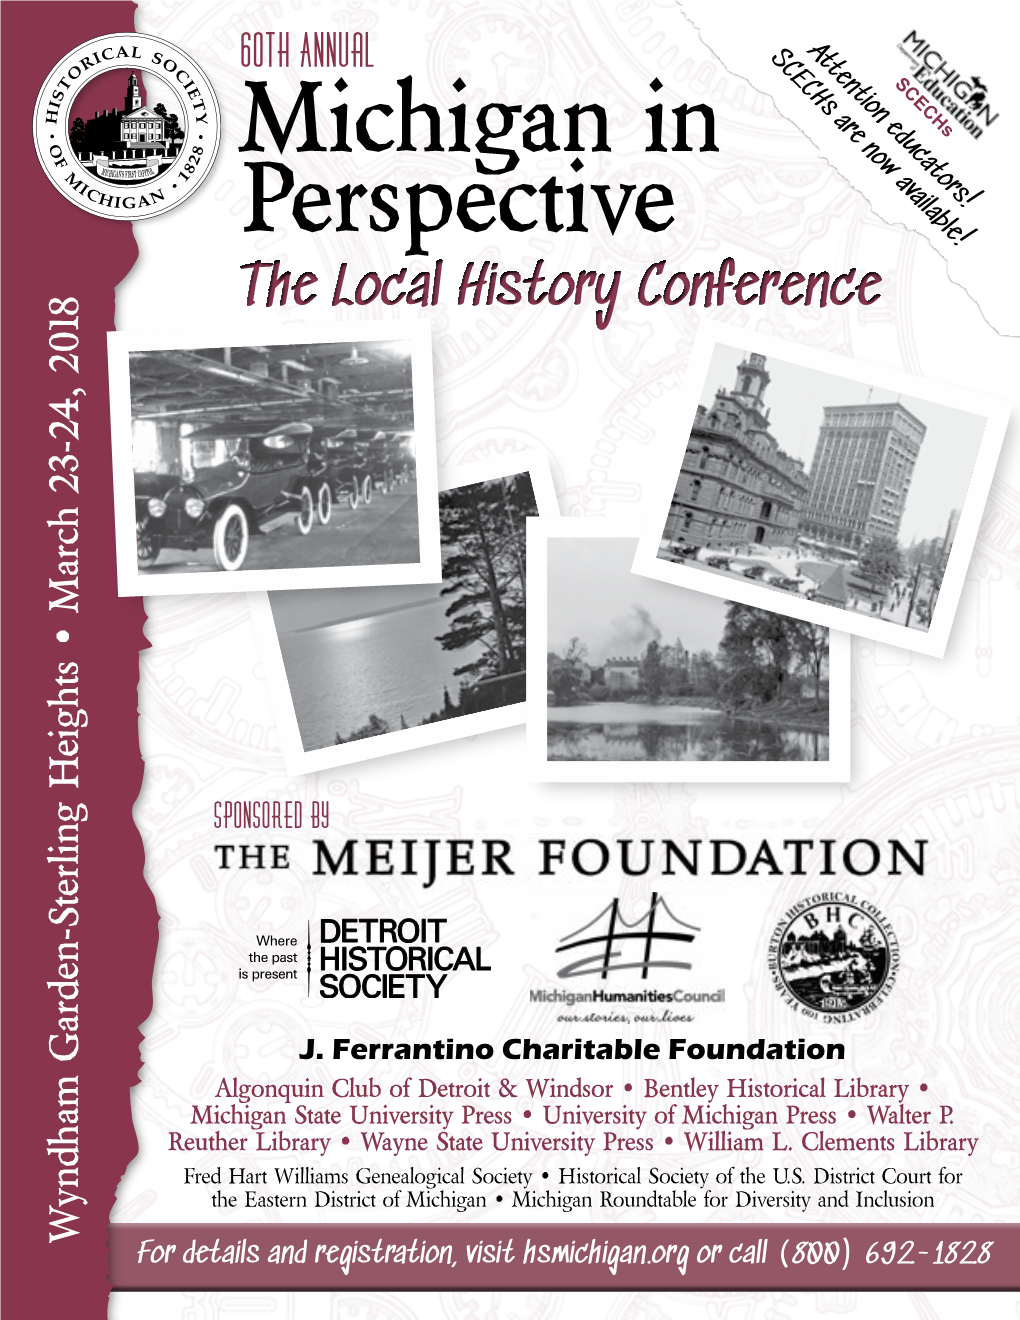 Michigan in Perspective: the Local History Conference March 23-24, 2018 34911 Van Dyke Ave